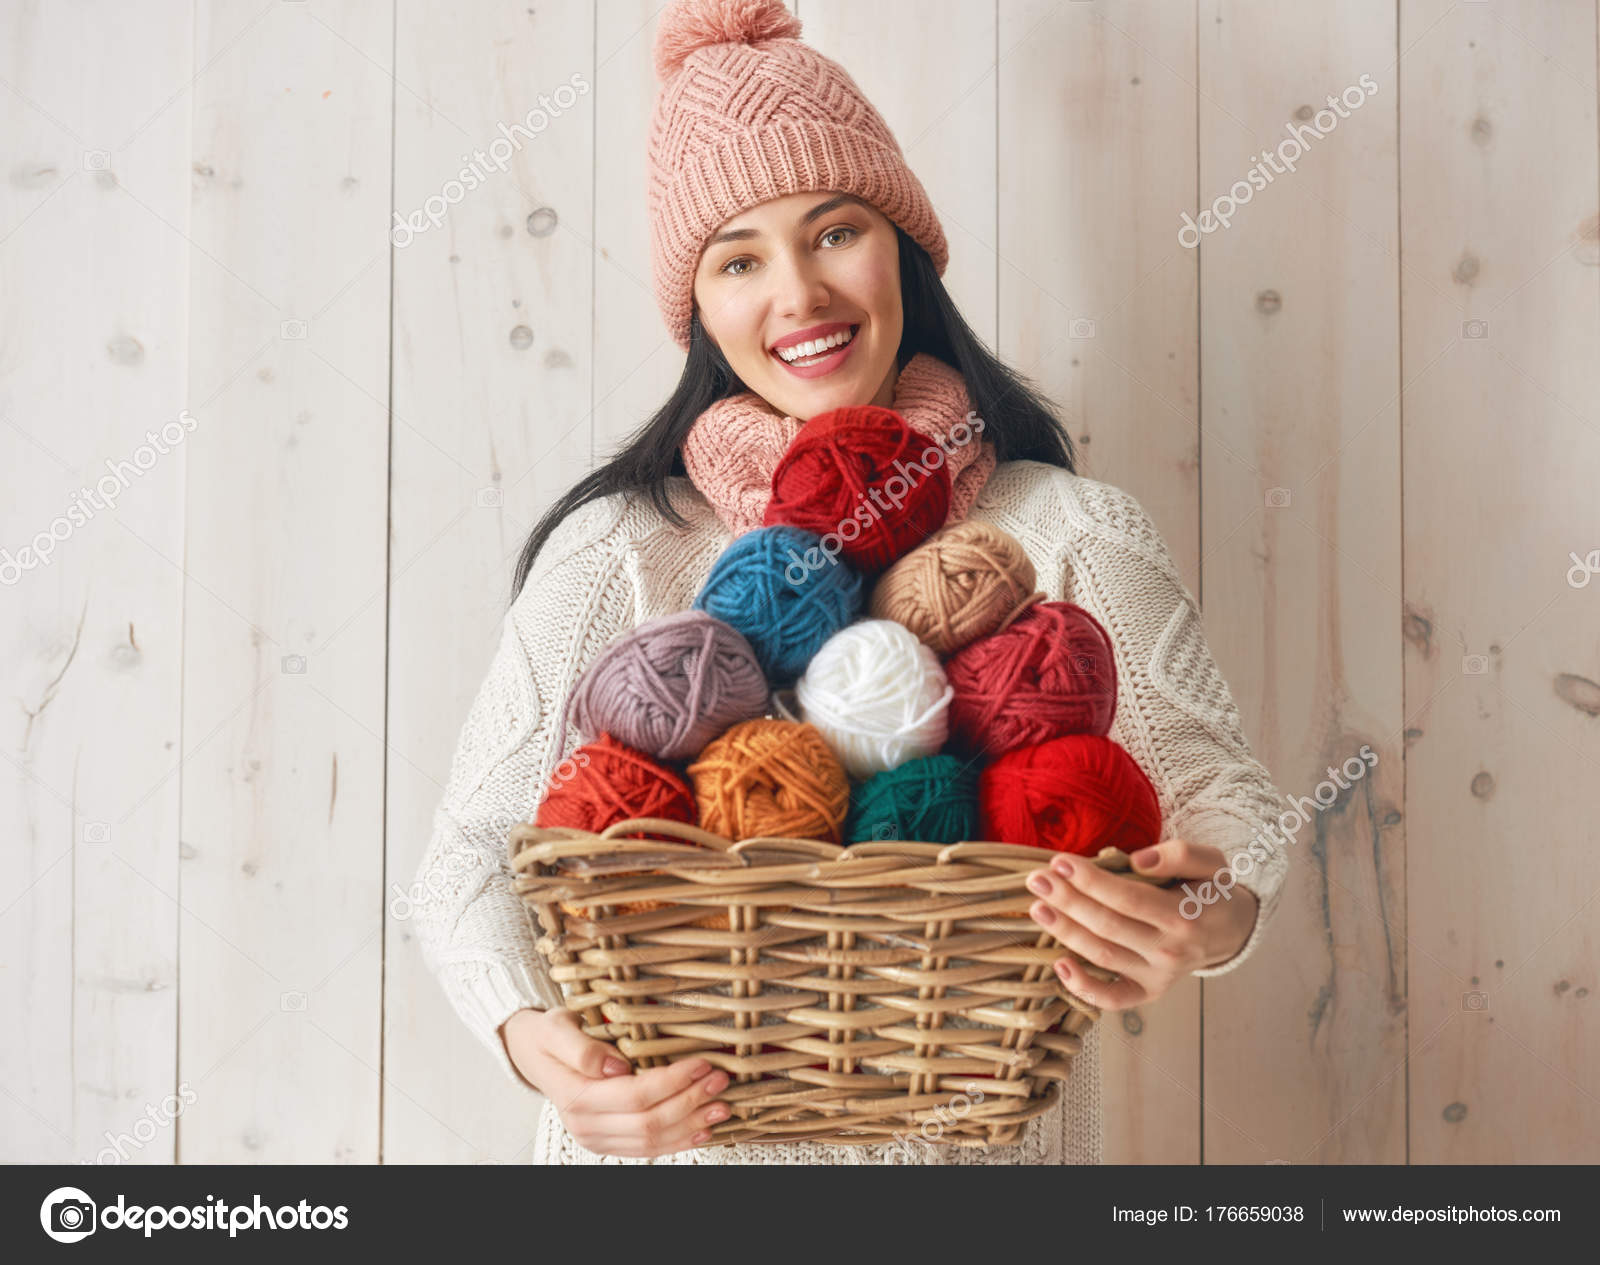 Winter portrait of young woman — Stock Photo © choreograph #176659038